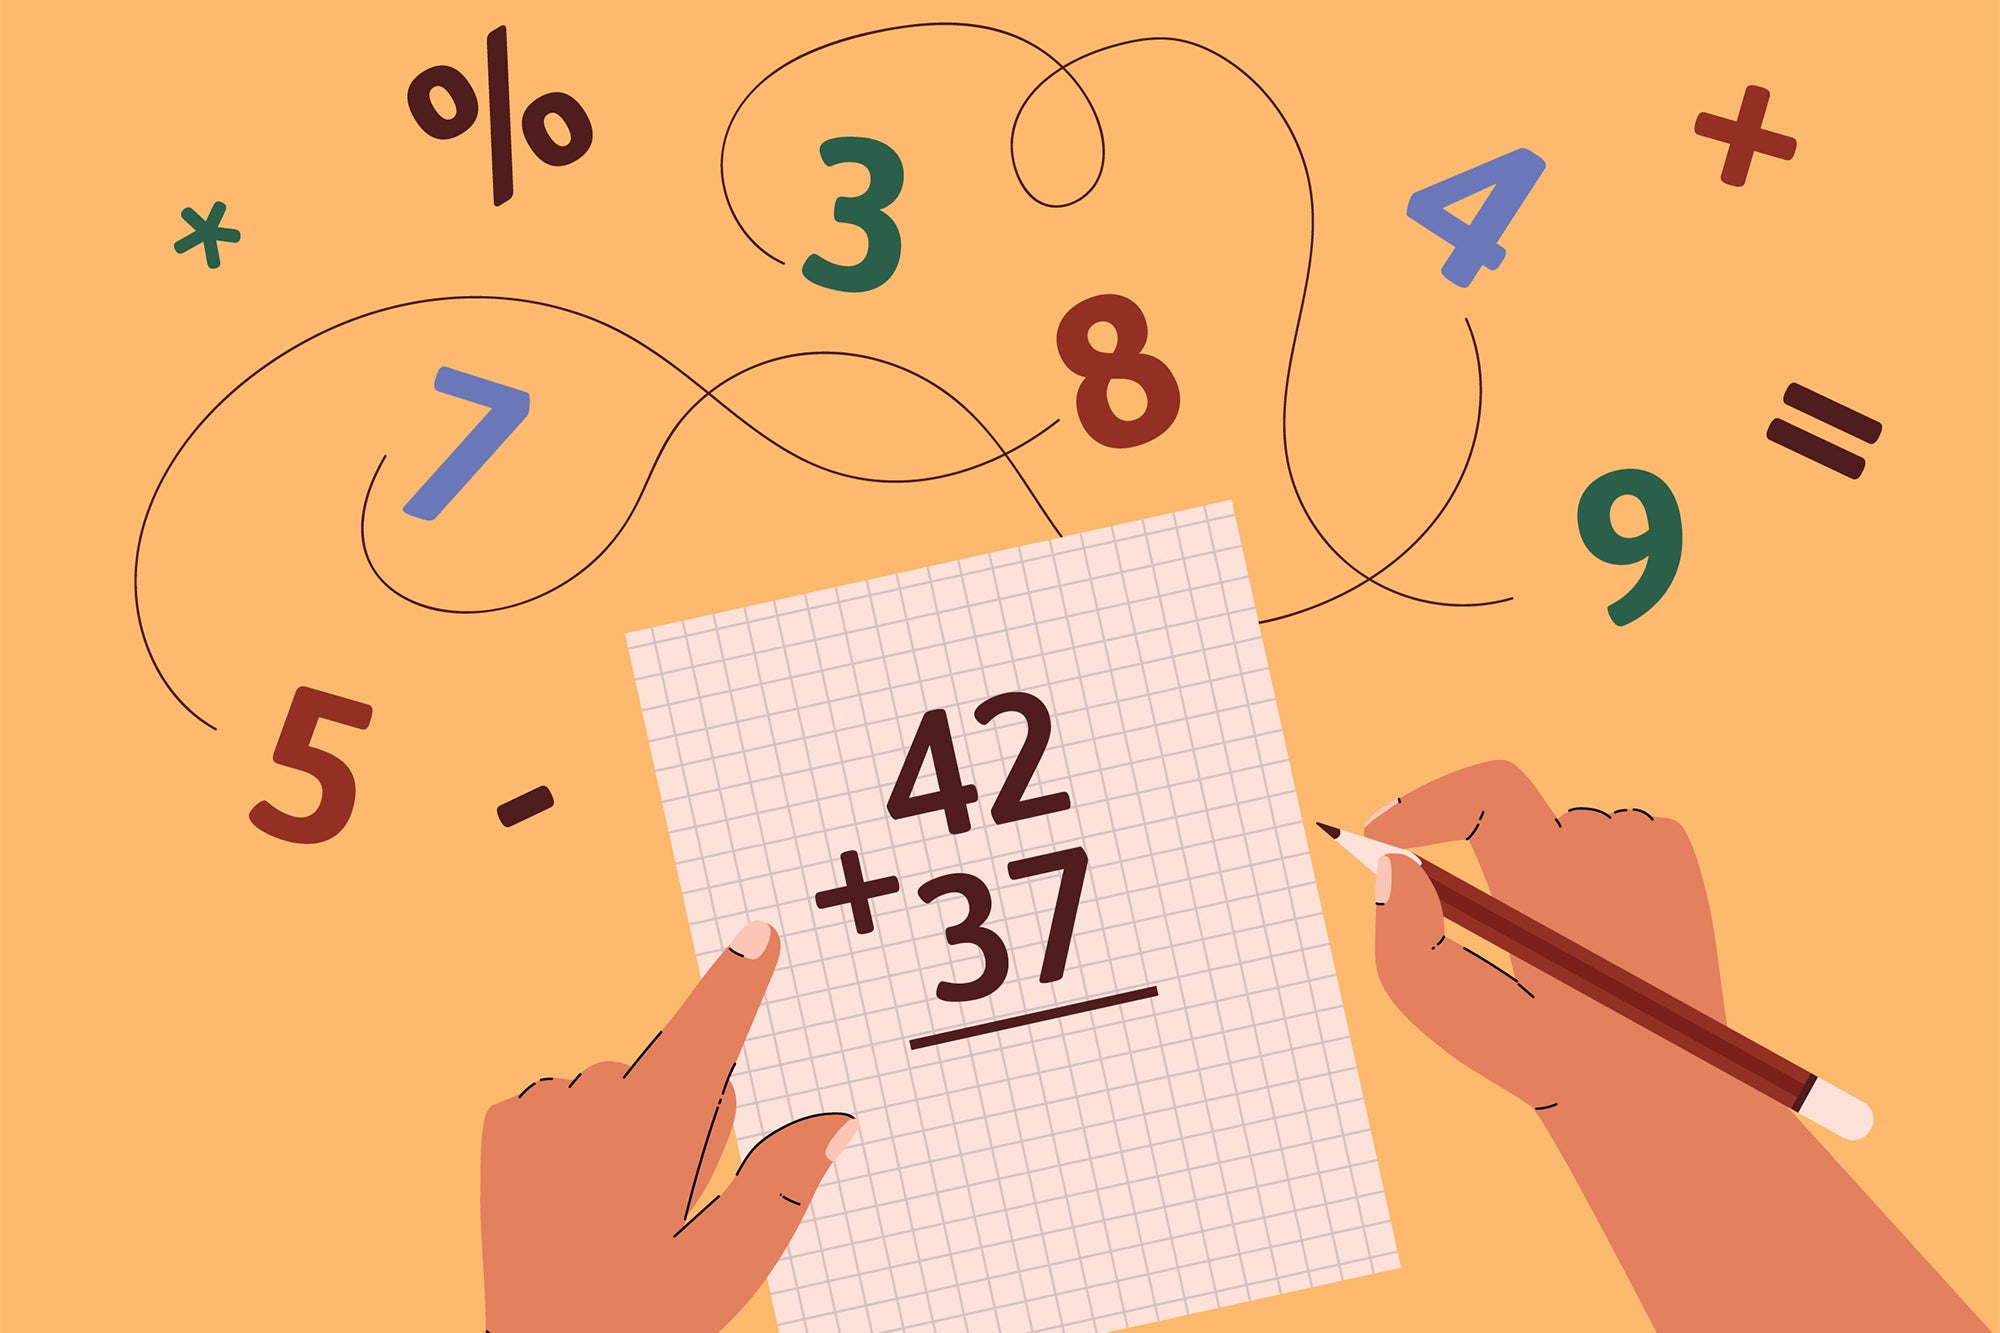 Illustration of an artist's concept showing a person holding a pencil, performing a mathematical calculation on a sheet of paper while numbers and symbols float around in the space above the paper